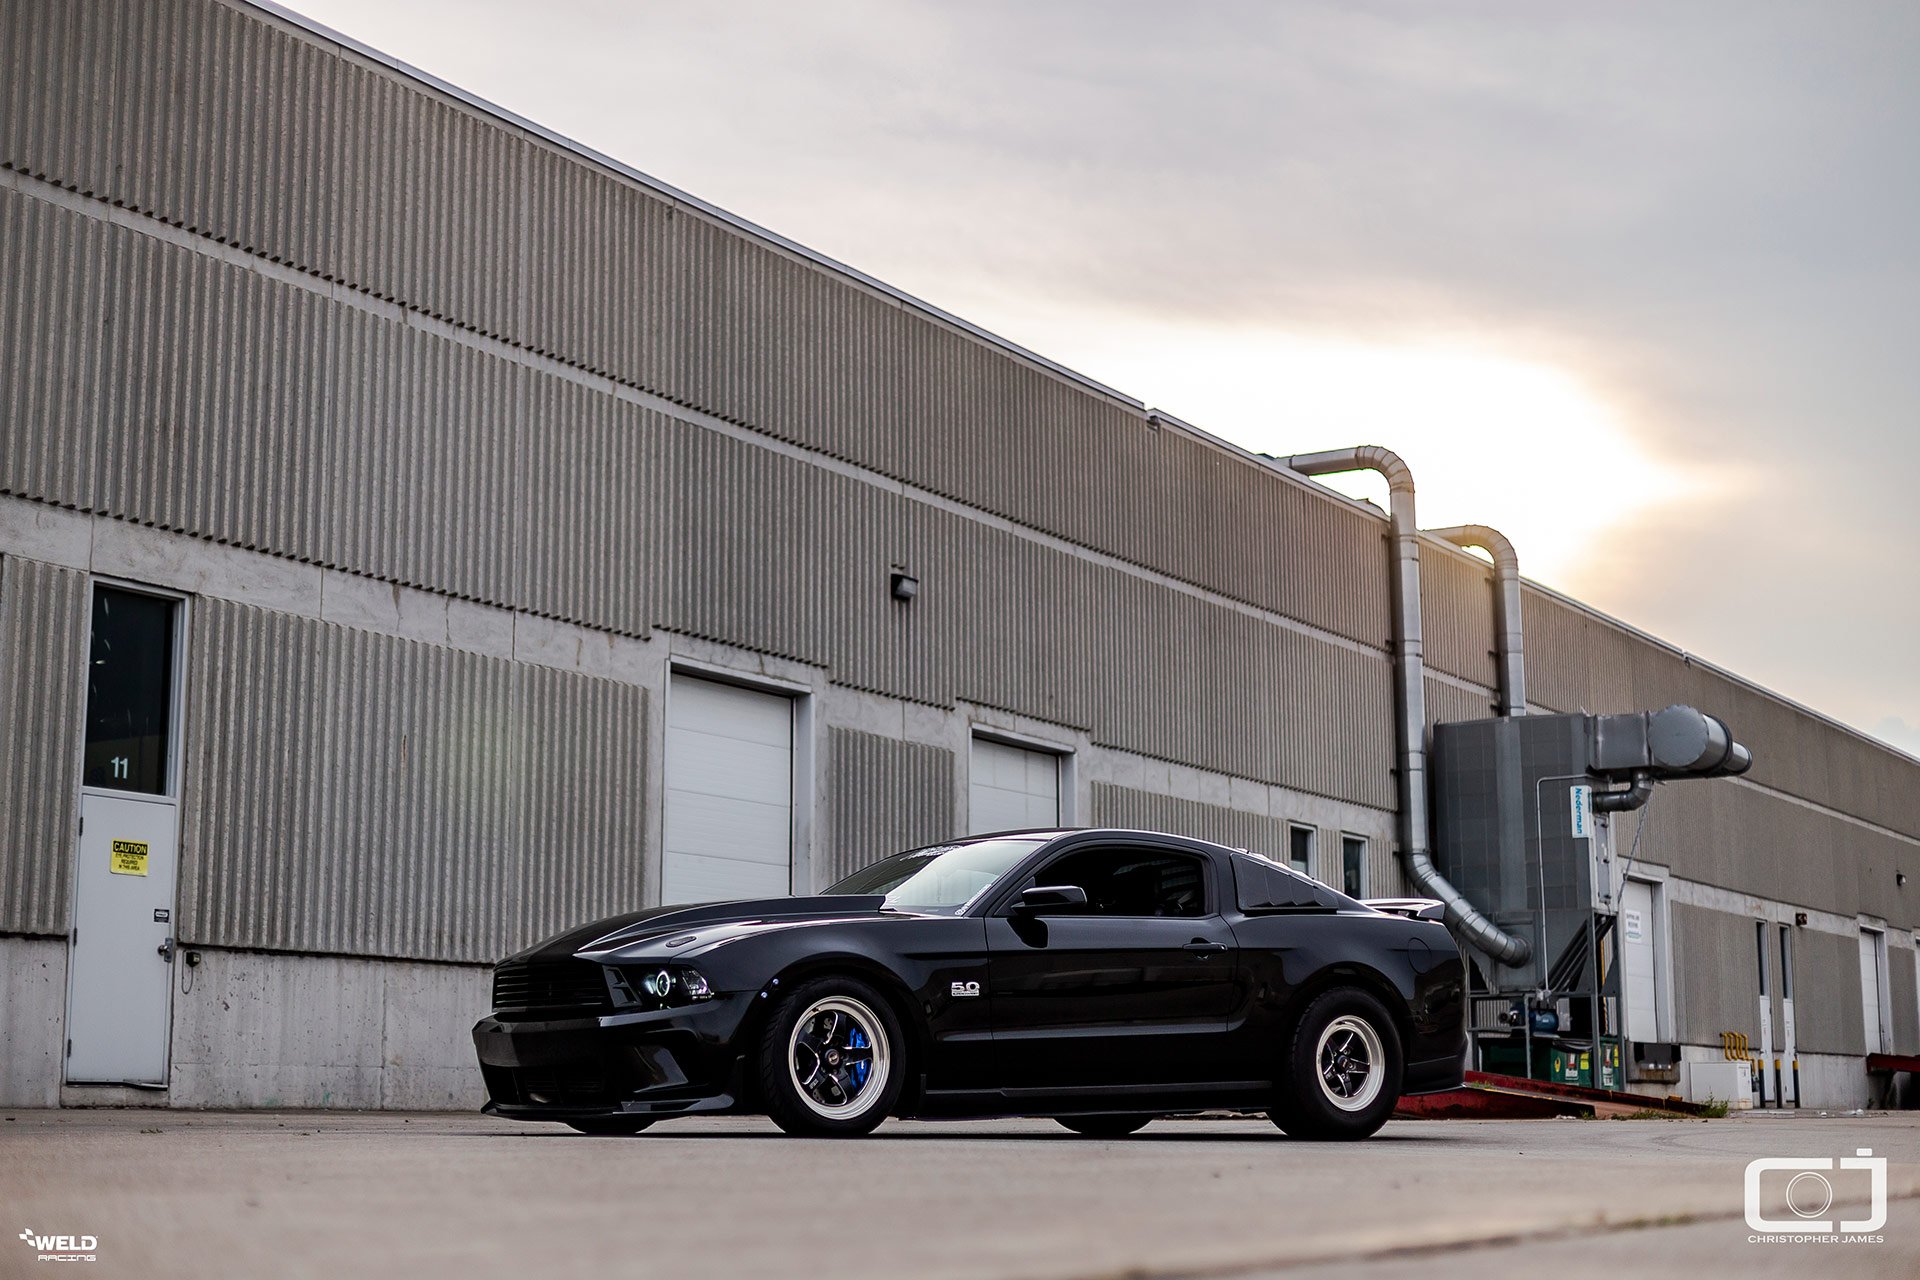 Black Ford Mustang 5.0 S197 - WELD S71 Three-Piece Forged Wheels